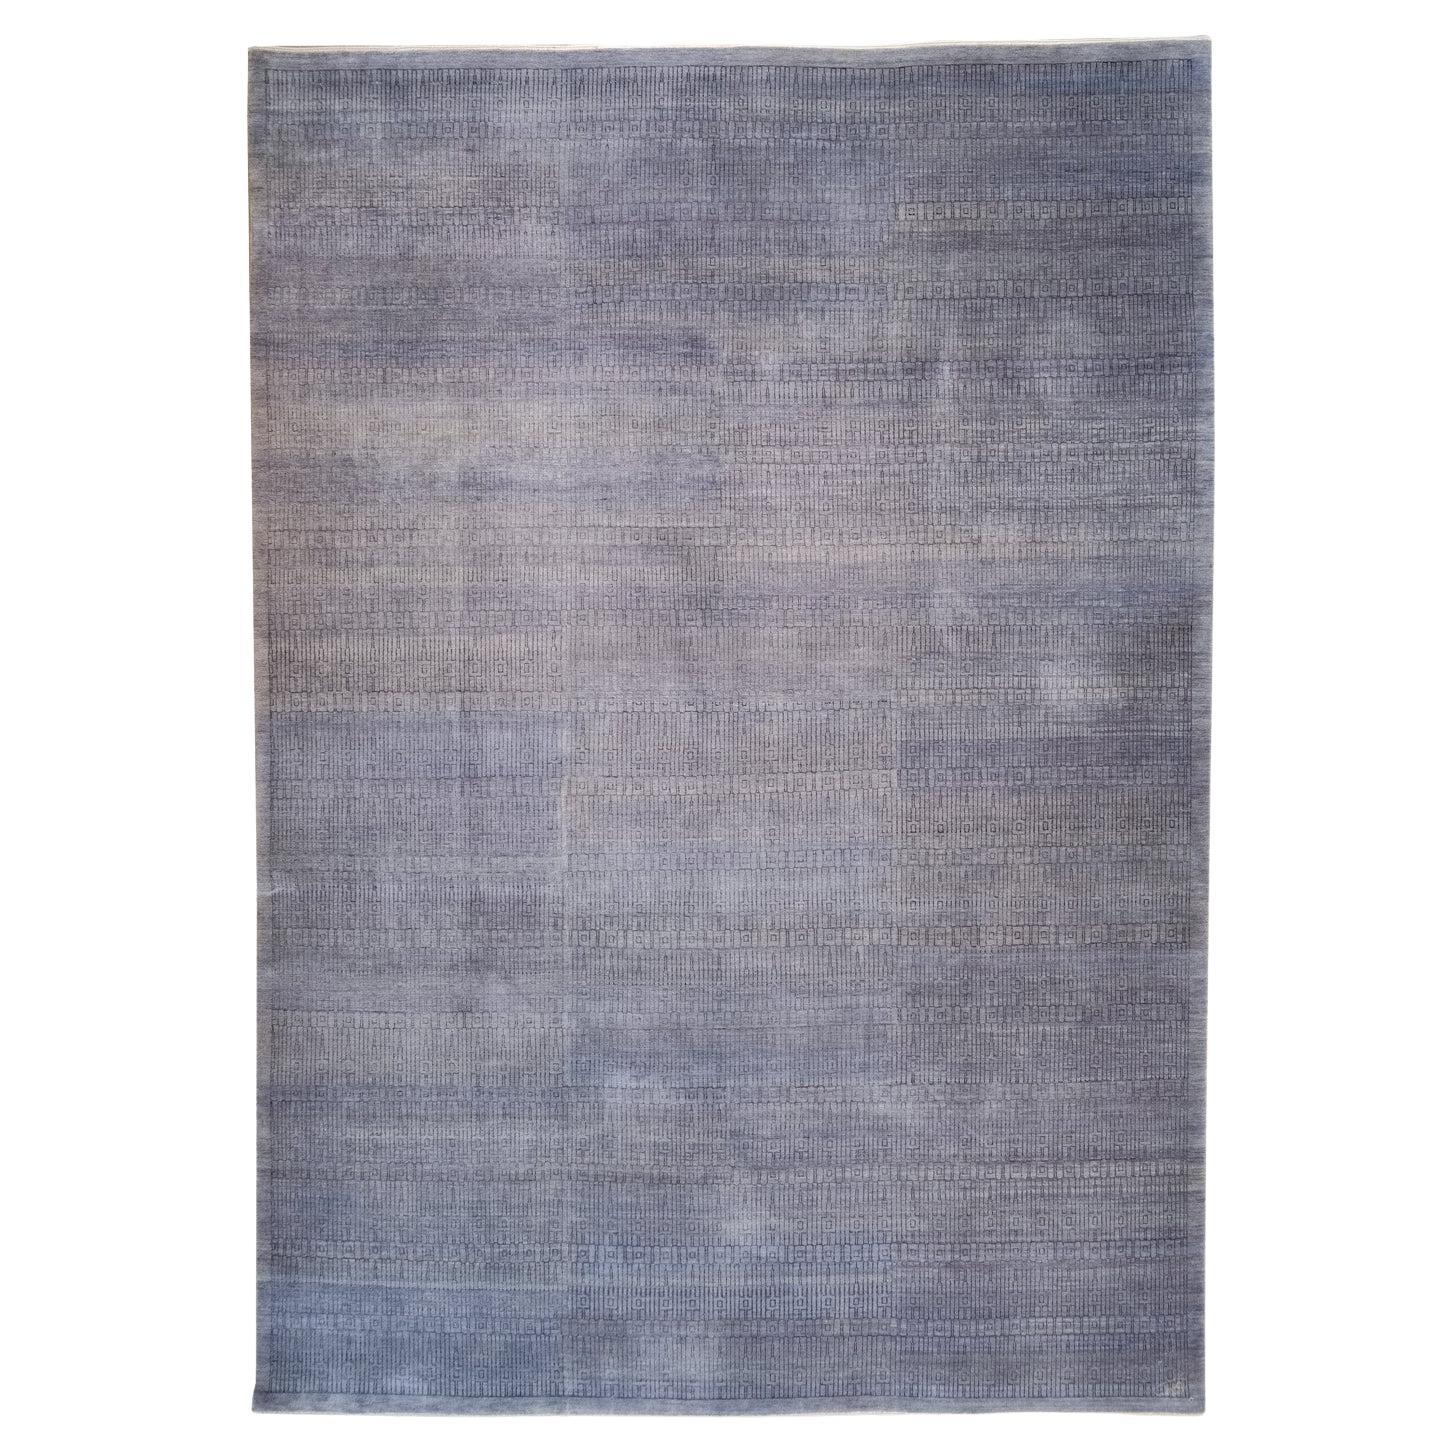 Orley Shabahang, Gray Modern Architectural Carpet, Wool, Hand-Knotted, 9' x 12'